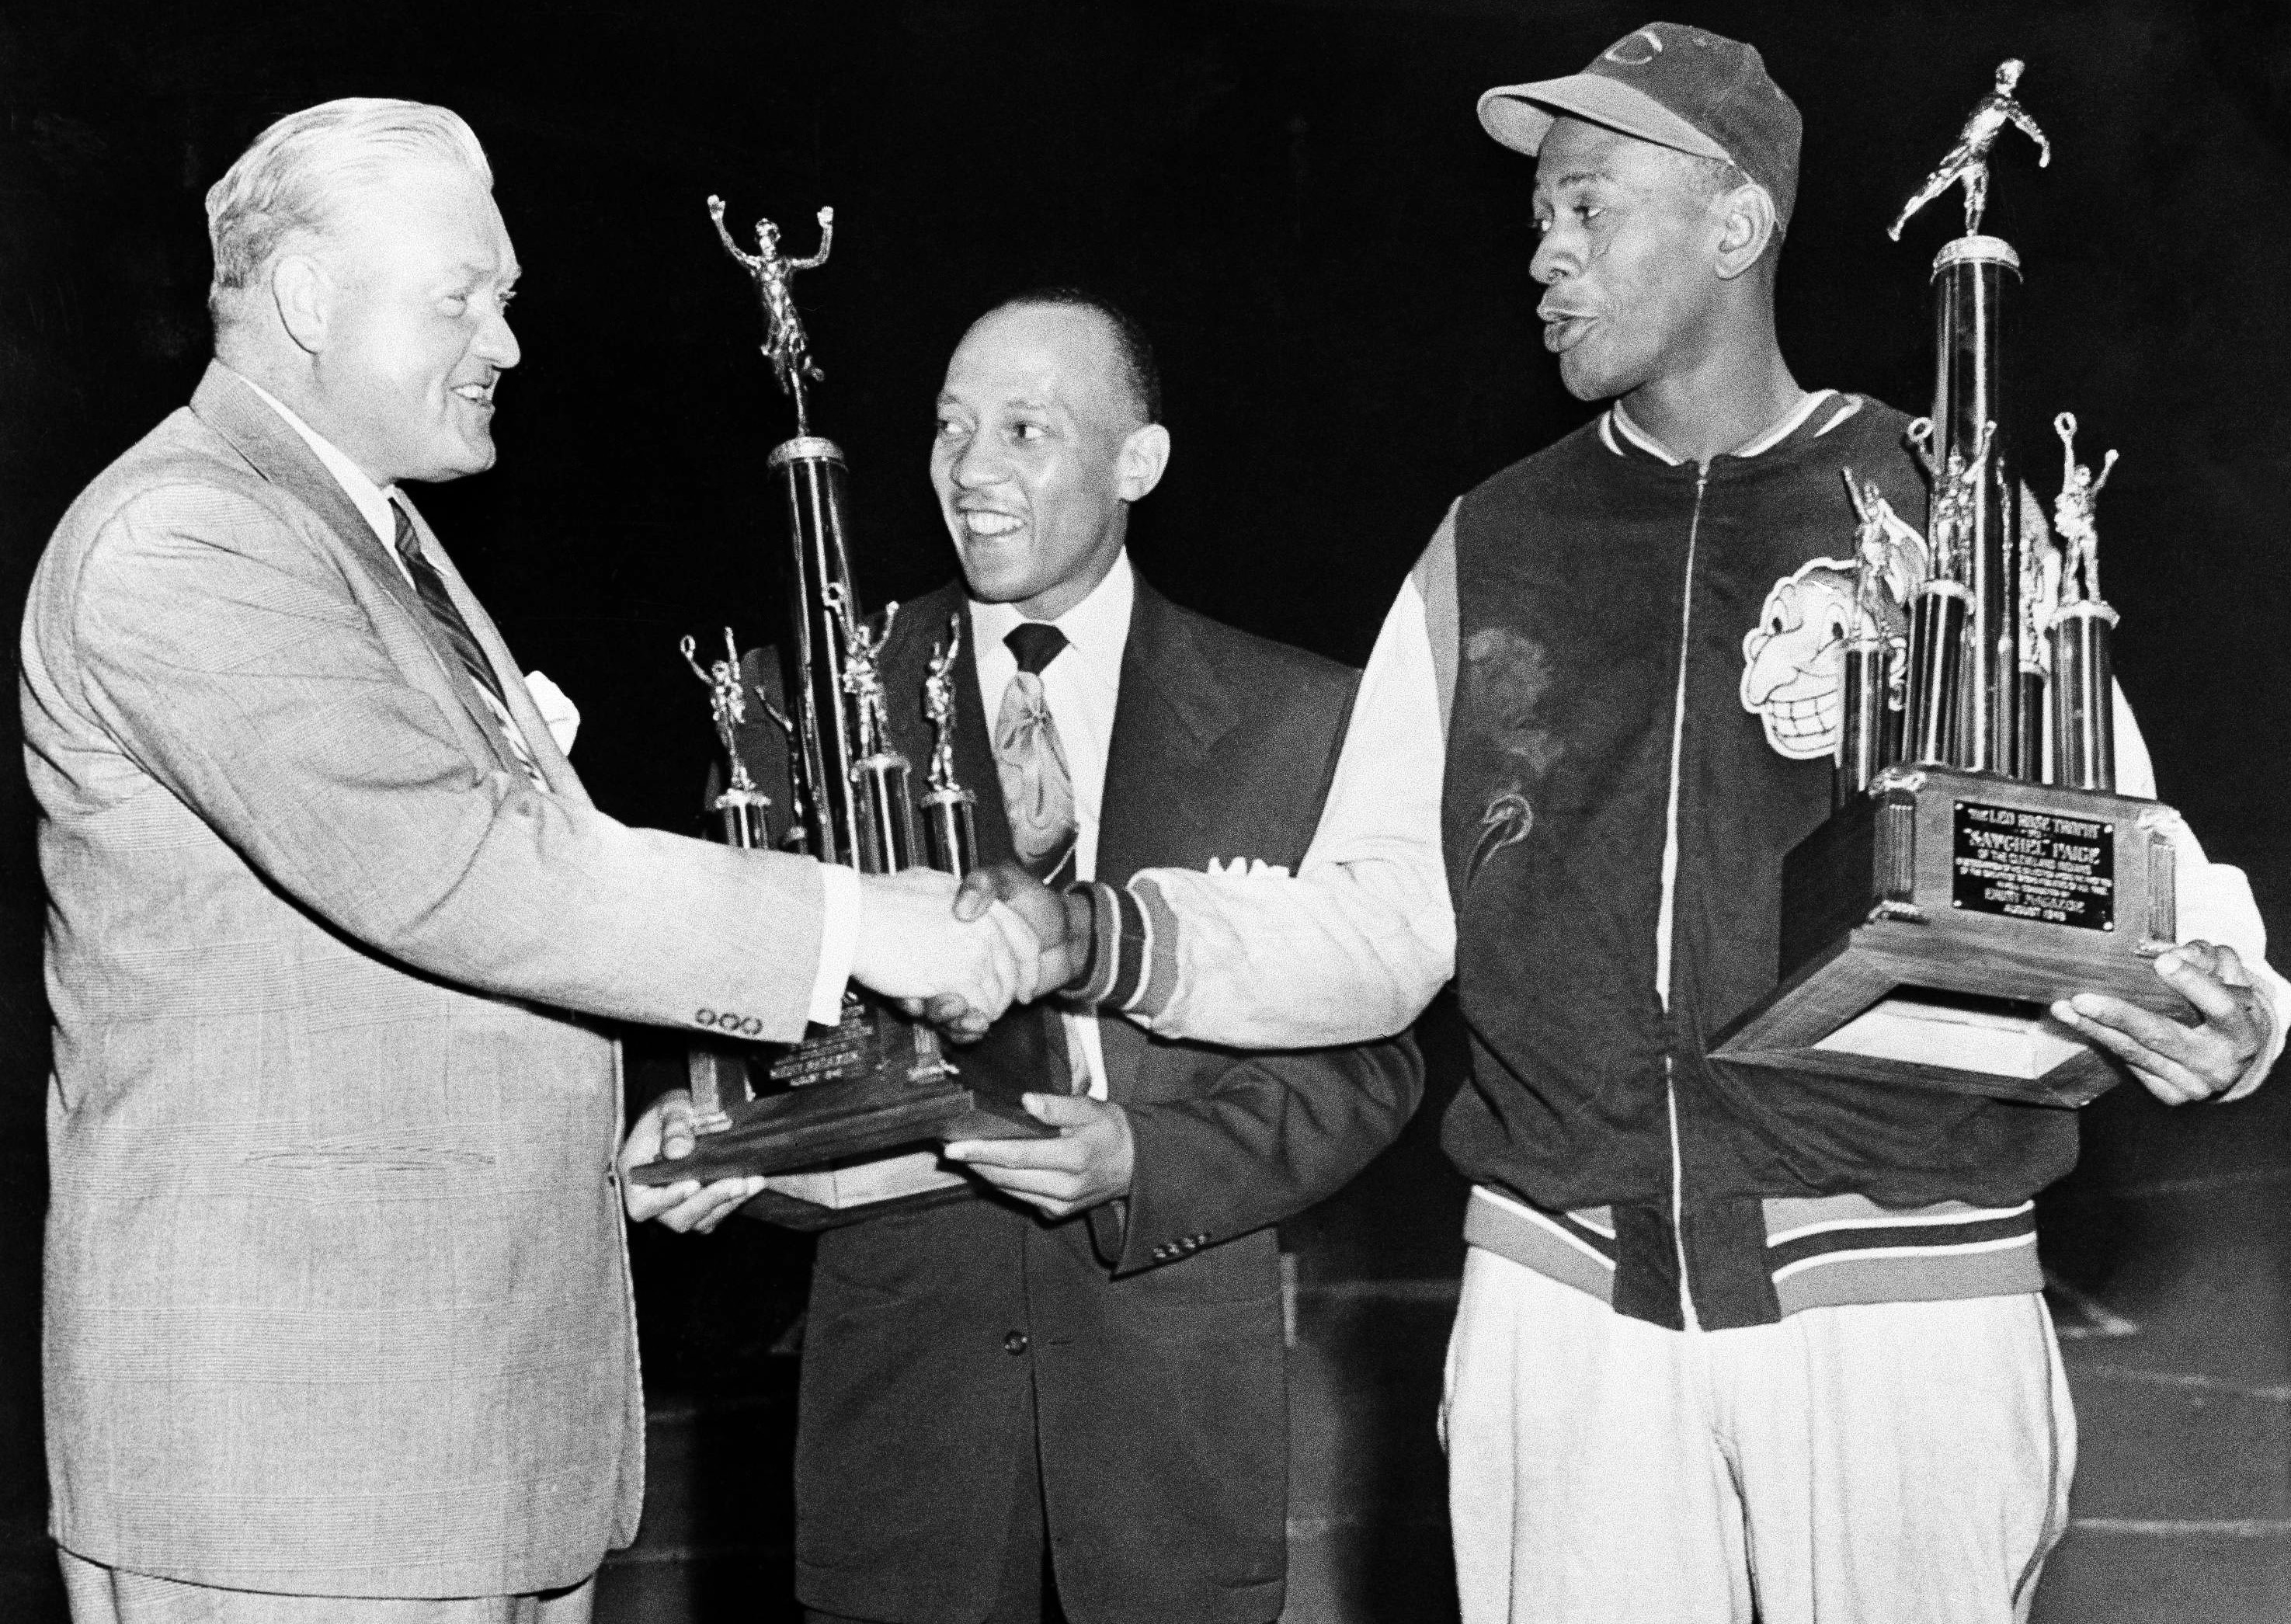 Jesse Owens (C) and pitcher Satchel Paige of the Cleveland Indians are congratulated by State's Attorney John Boyle, left, upon winning trophies for finishing first and fourth respectively in a nation-wide poll on outstanding Black athletes on Aug. 19, 1949. The presentation of the trophies were made at Comiskey Park in Chicago at a Cleveland-Chicago White Sox game.